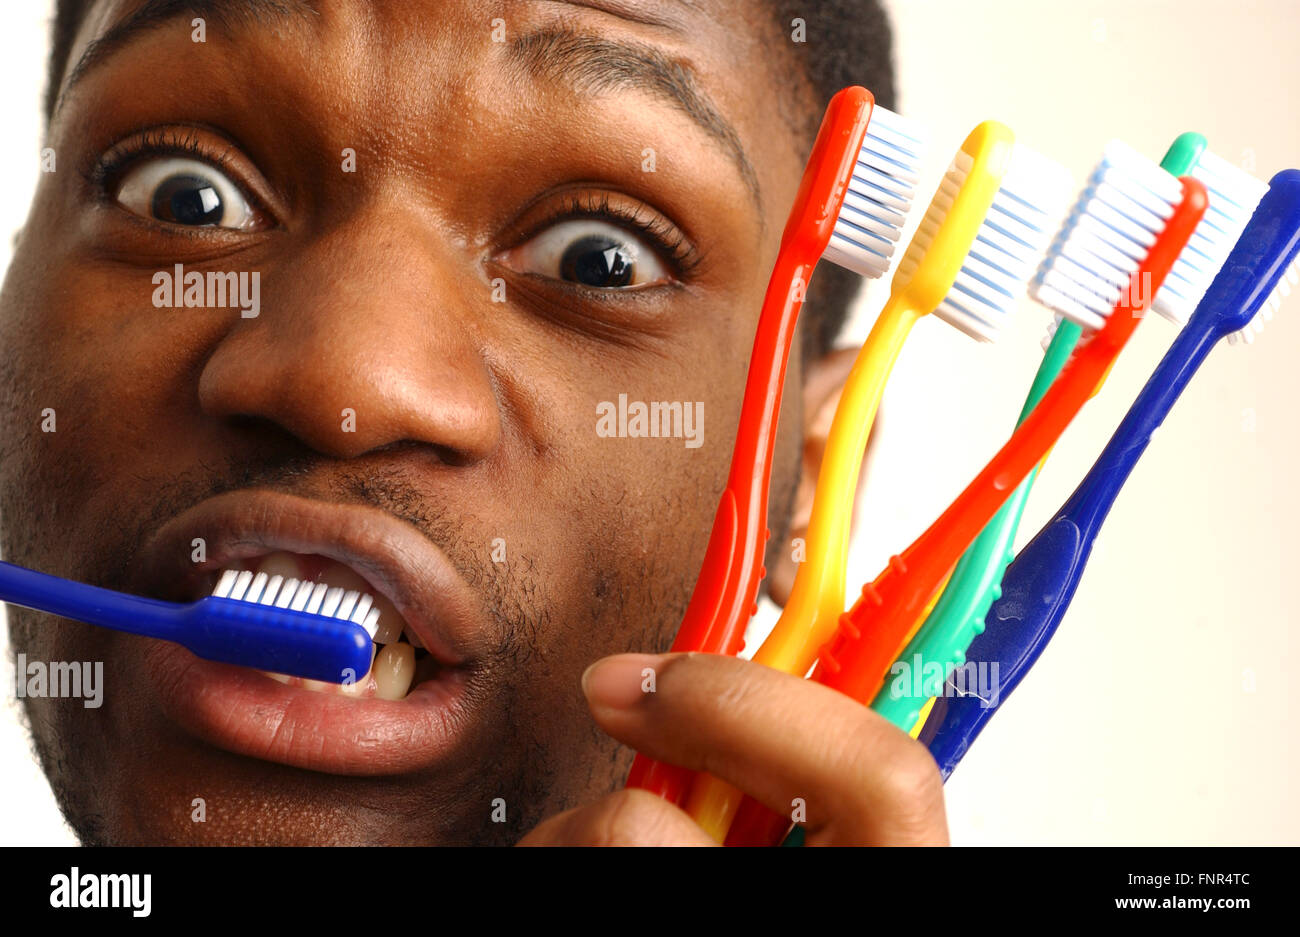 A young man brushes his teeth with one hand, whilst holding a number of toothbrushes in his other hand. Stock Photo